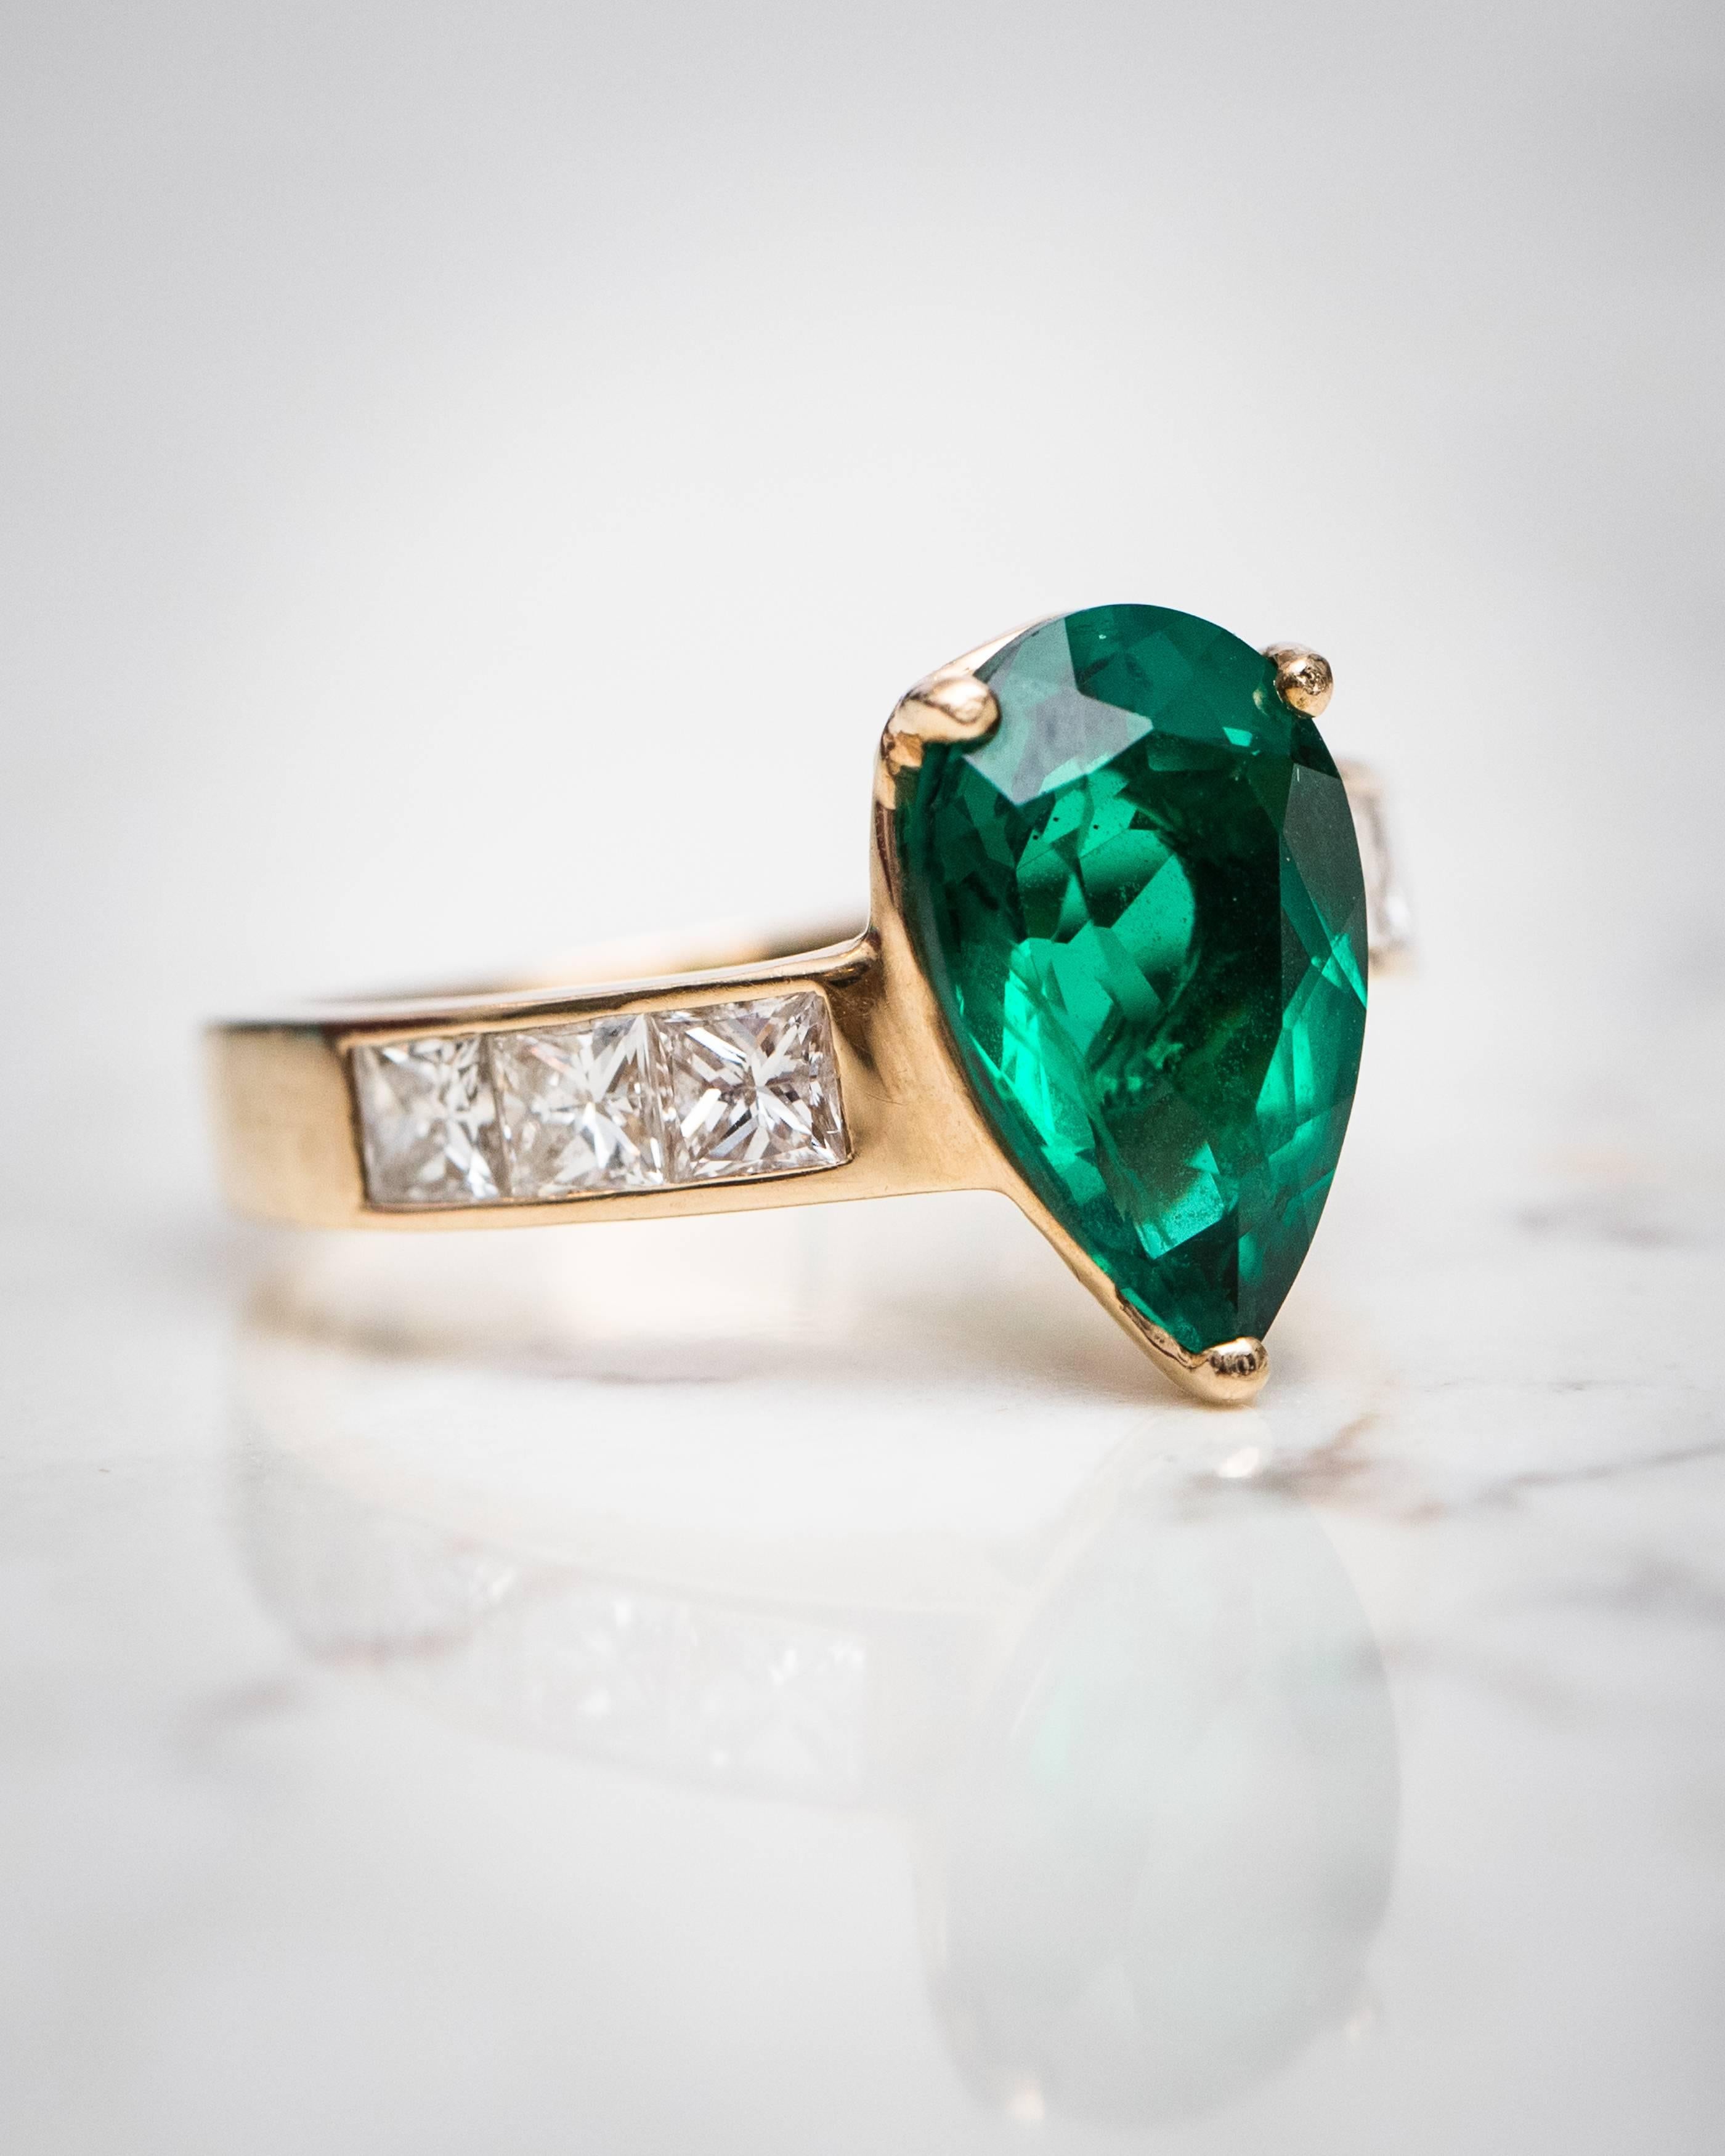 1950s Retro Princess cut Diamond, Pear cut Chatham Emerald and 14 Karat Yellow Gold Ring

Features 1.0 carat total weight Princess cut Diamonds, 3 carat Pear cut Chatham lab graded Emerald and 14 Karat Yellow Gold. The deep green emerald is securely